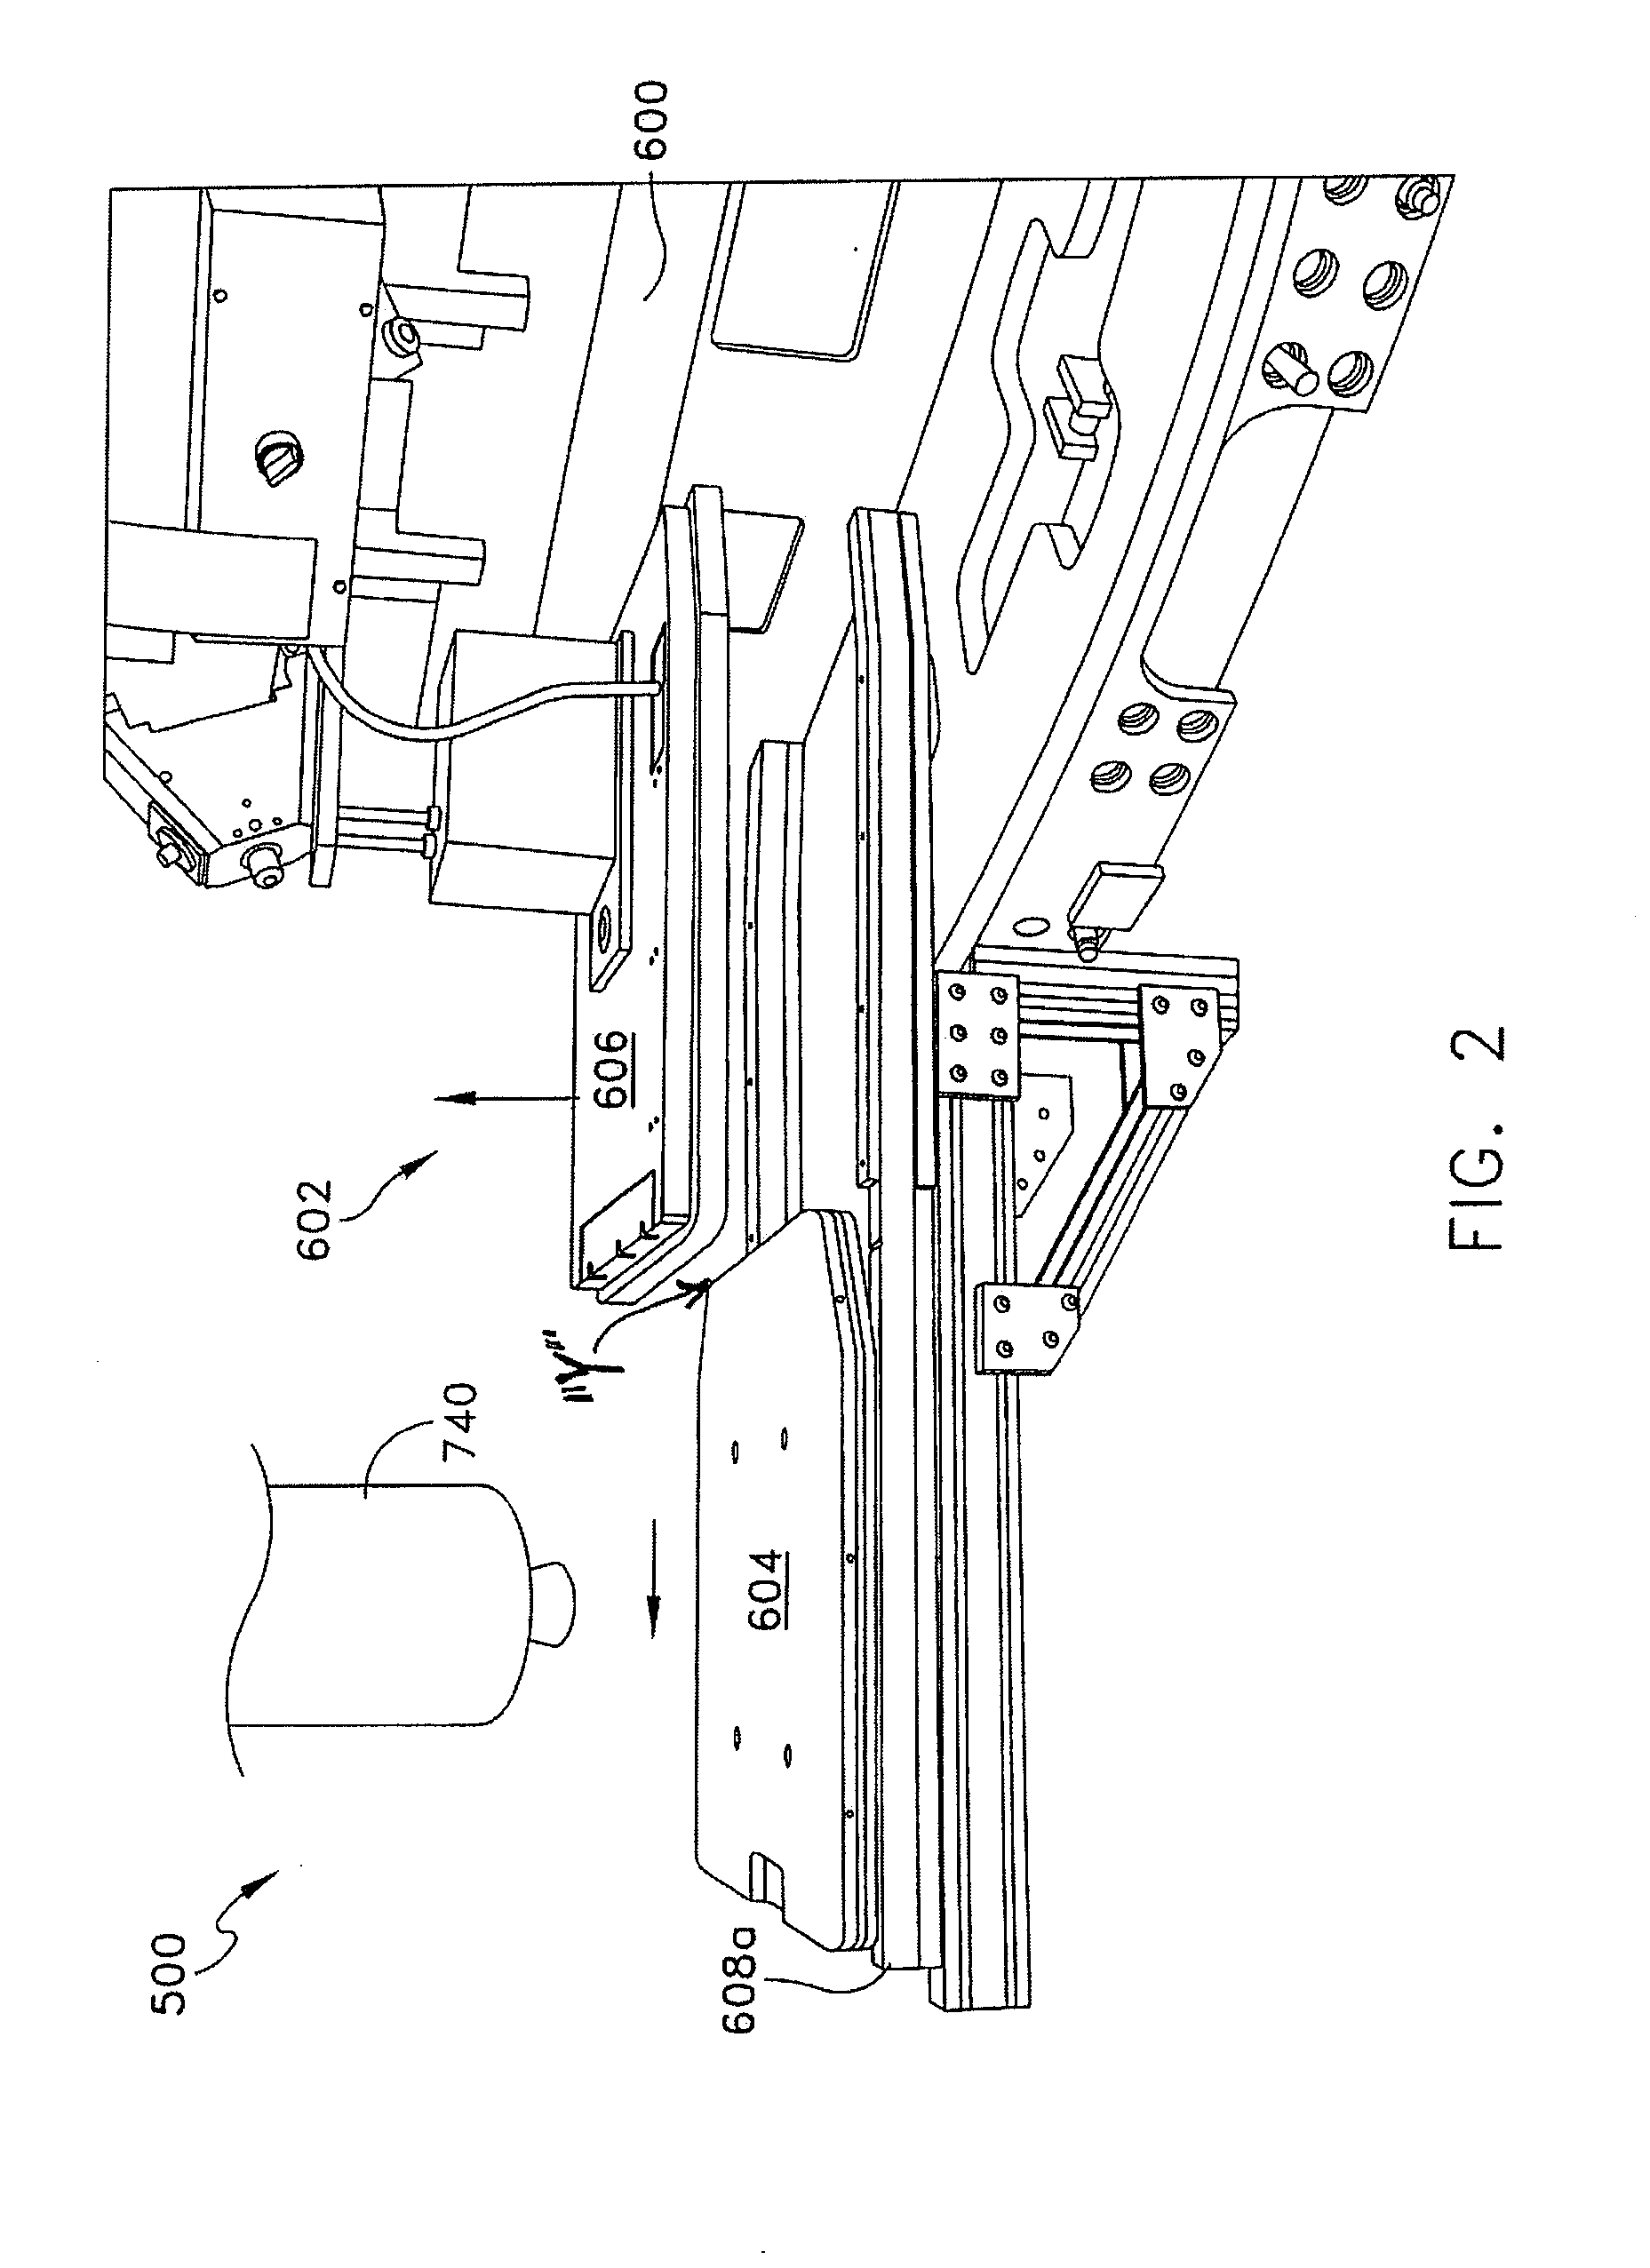 Molding system, method and articles formed thereby